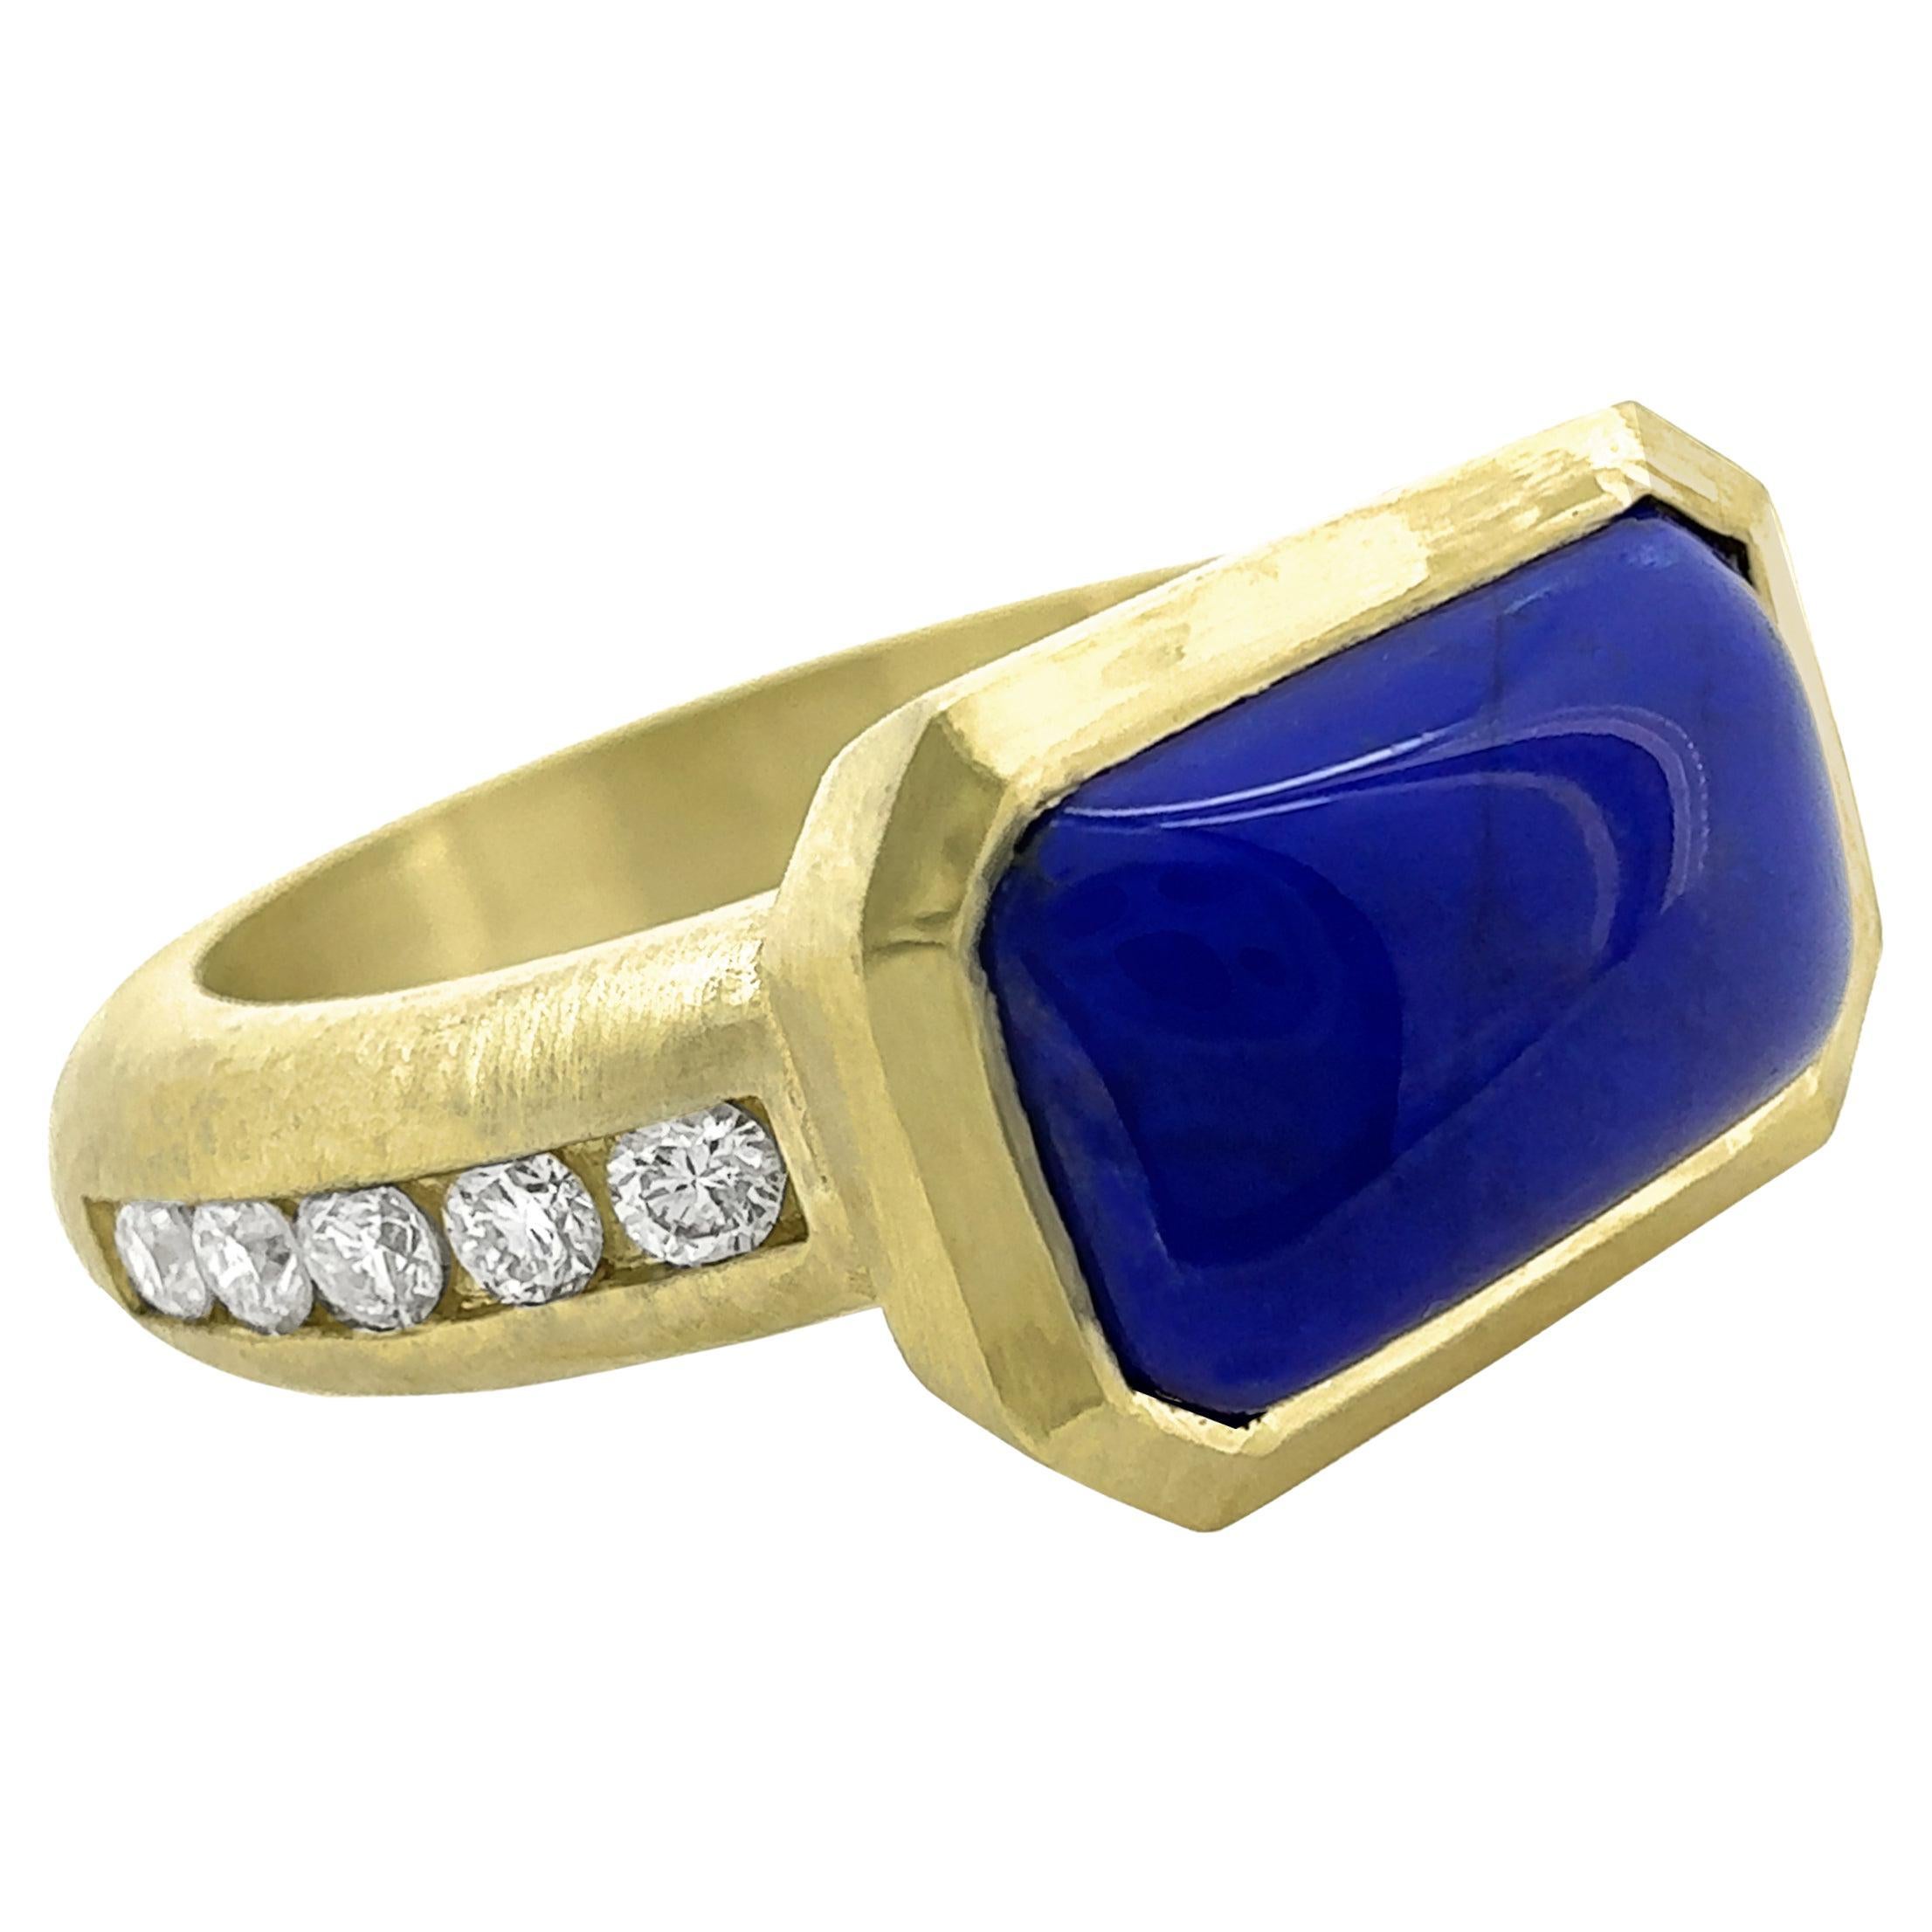 "Bathtub" Ring with Lapis & Diamonds in Satin-Finished 18K Karat Gold For Sale